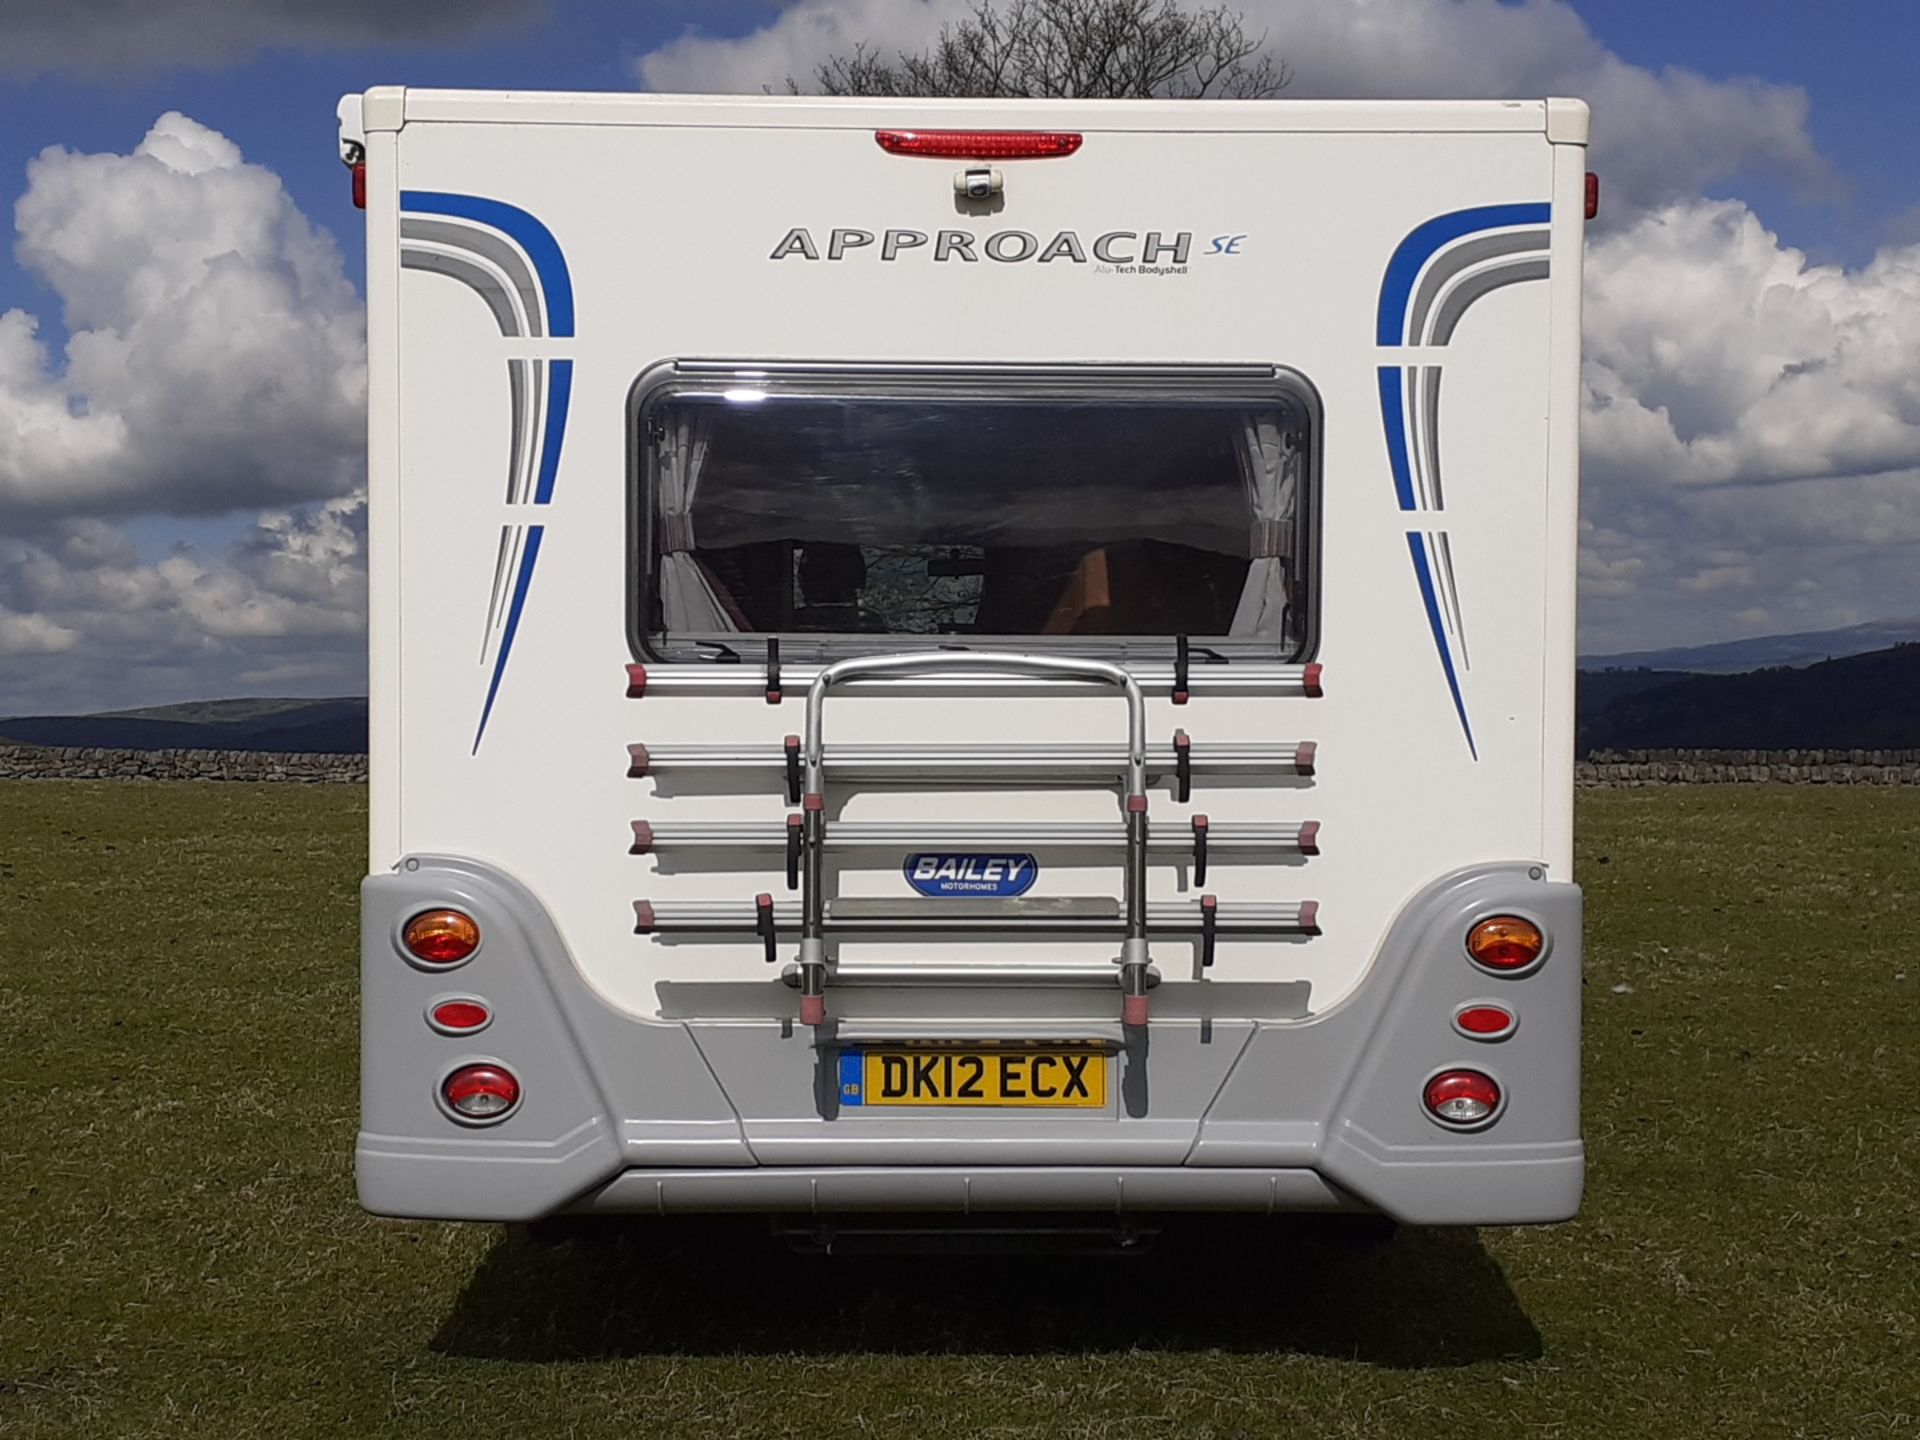 2012 BAILEY APPROACH 760 SE LUXURY 6 BERTH MOTORHOME £10K OF EXTRAS, 30,000 MILES FROM NEW - Image 9 of 31